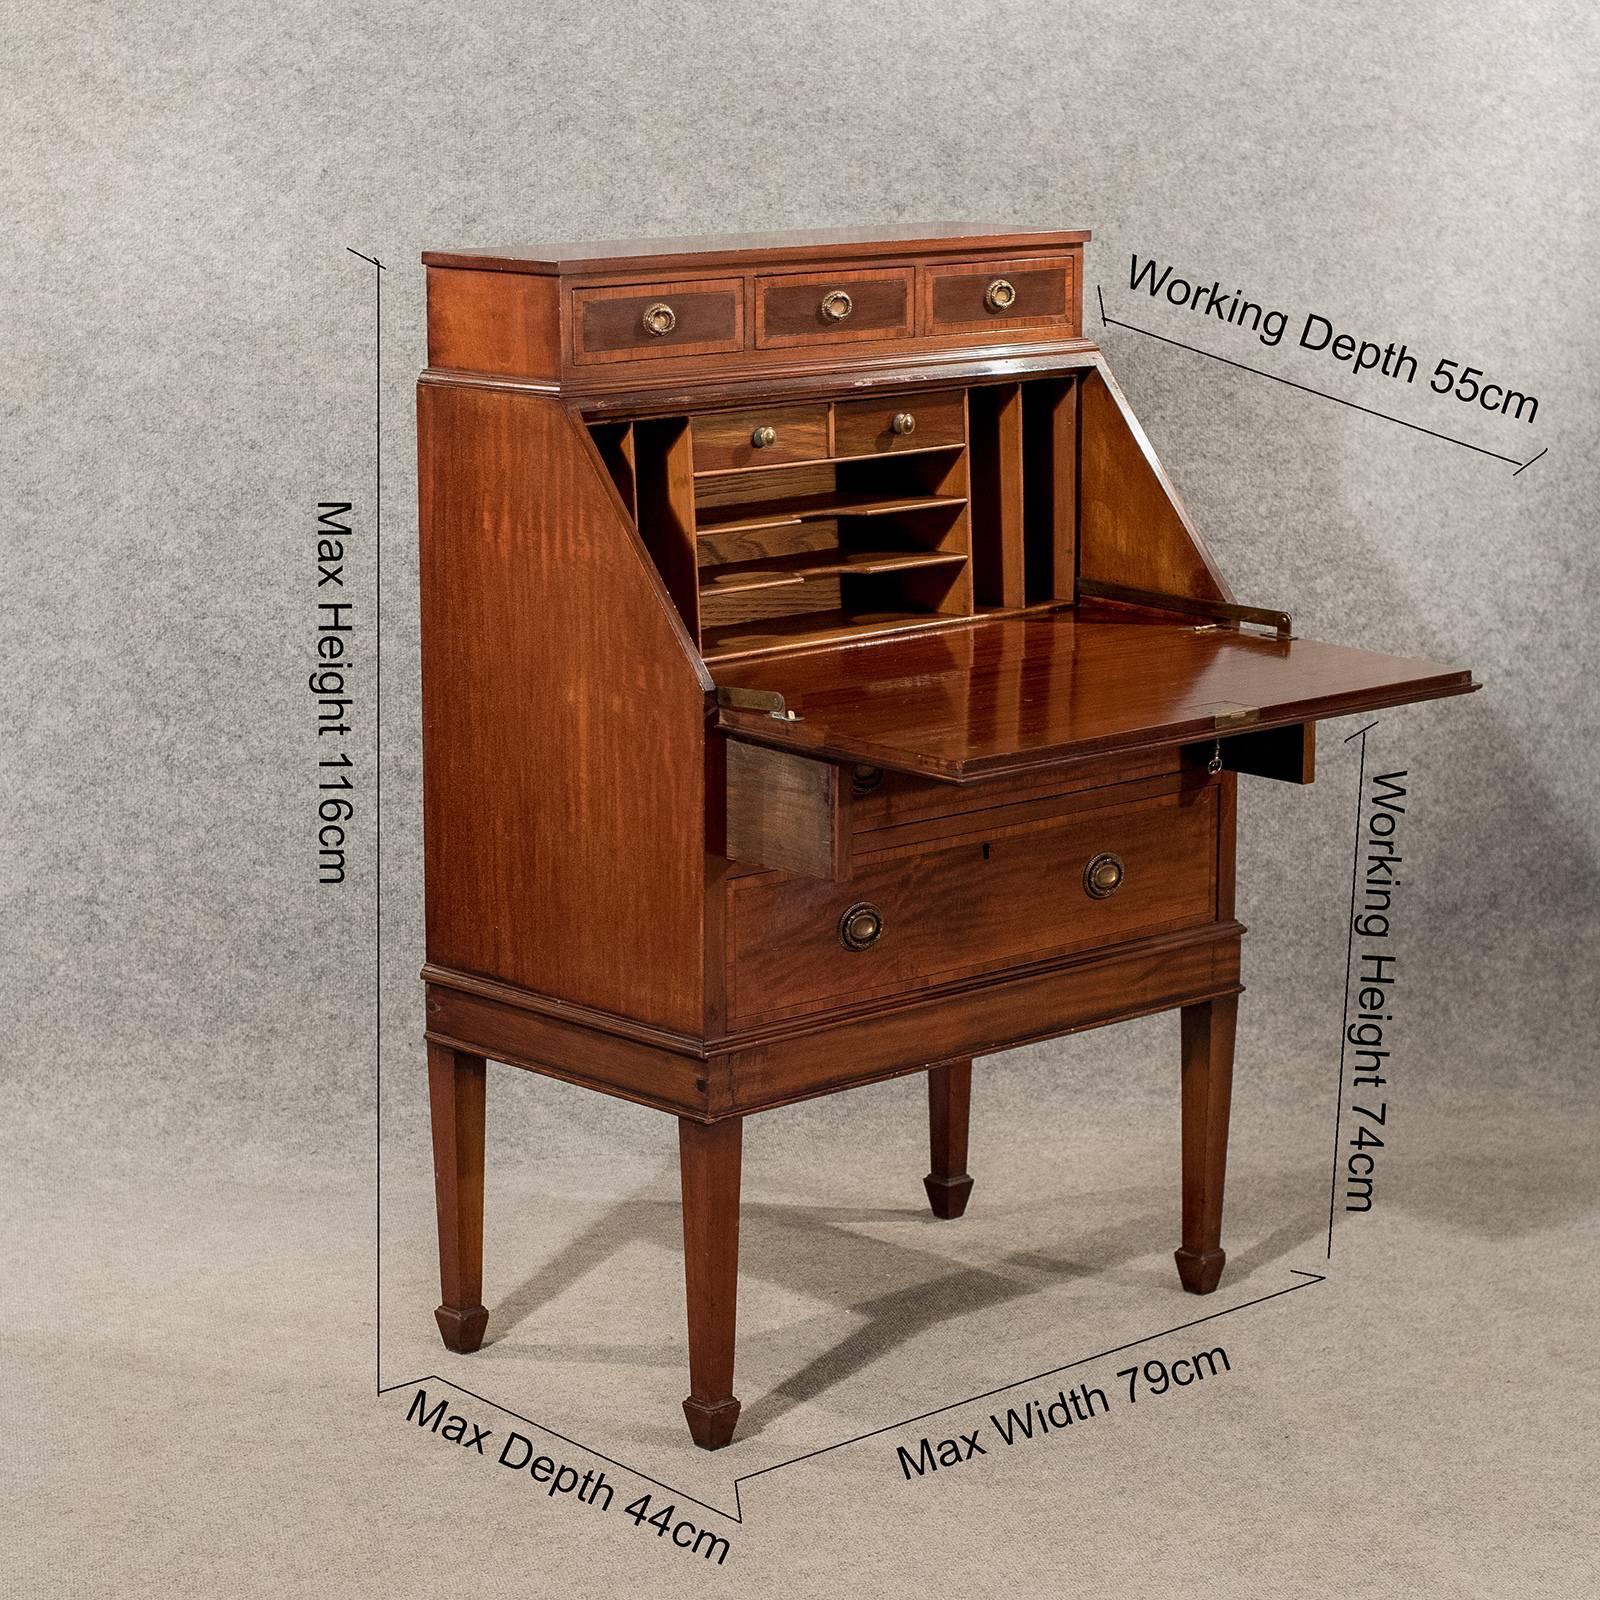 A very pleasing original Edwardian writing bureau desk presented in very good antique condition
By the noted Torquay, Devon manufacturer T. Oliver & Sons
Of great interest displaying quality throughout with useful upper bank of utility drawers
In